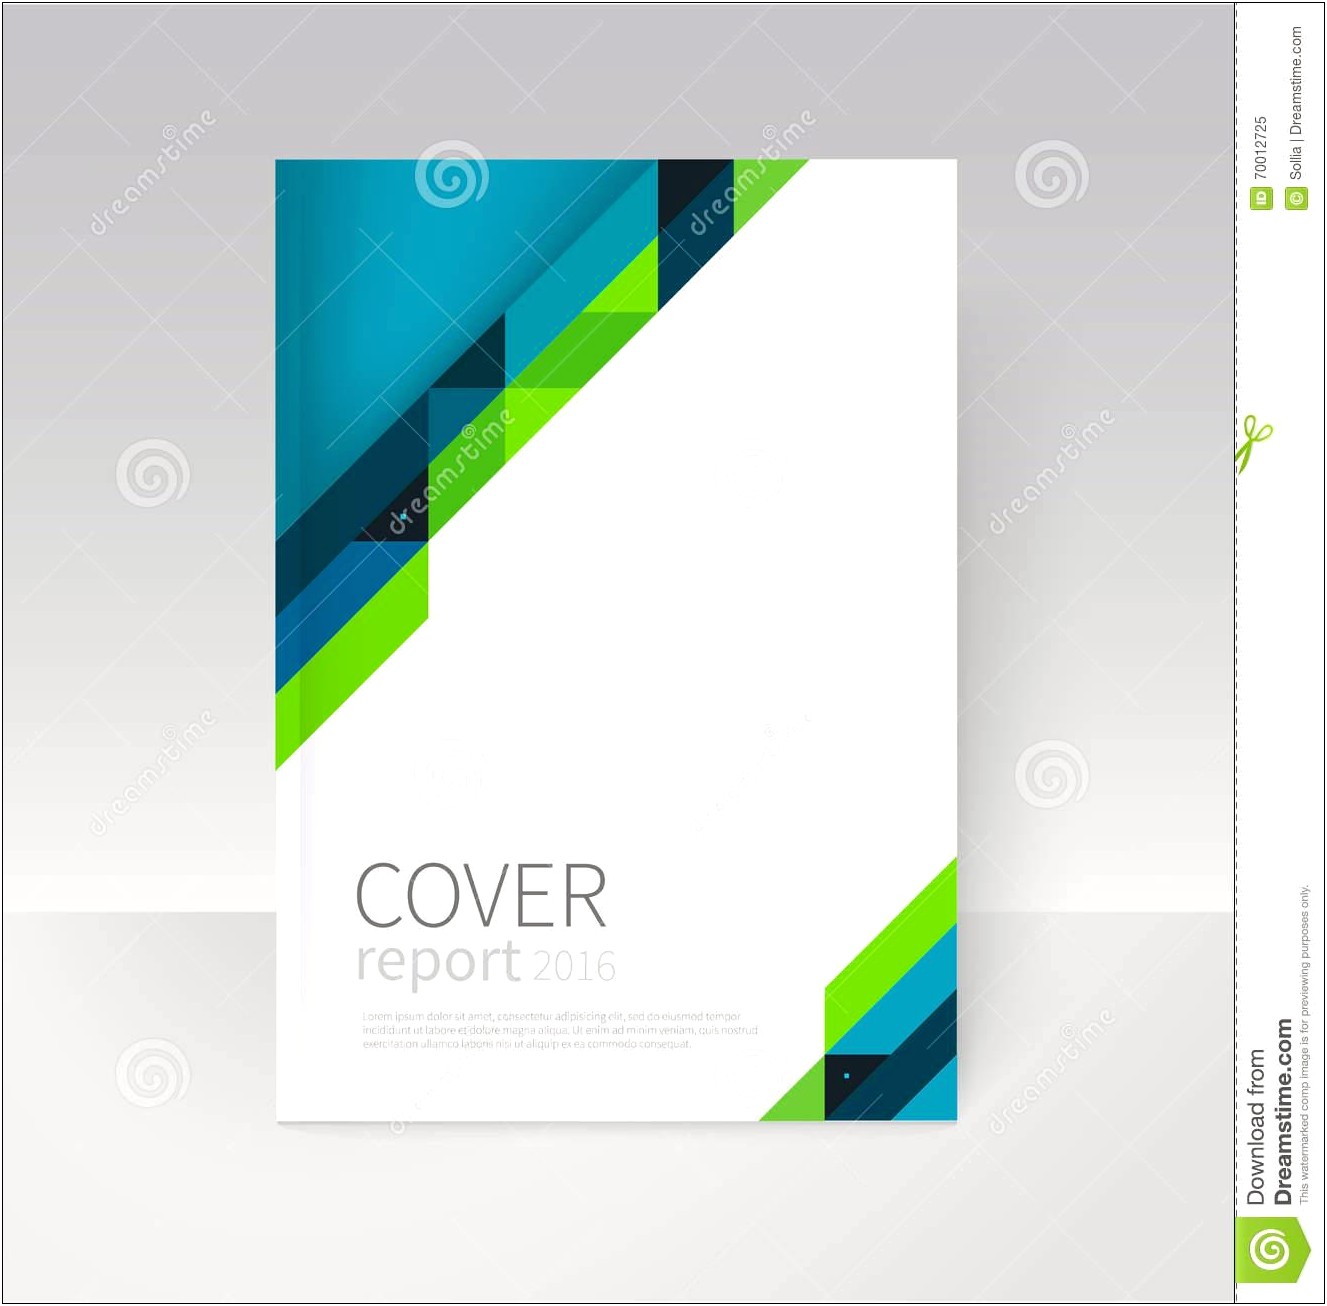 Booklet Cover Design Template Free Download